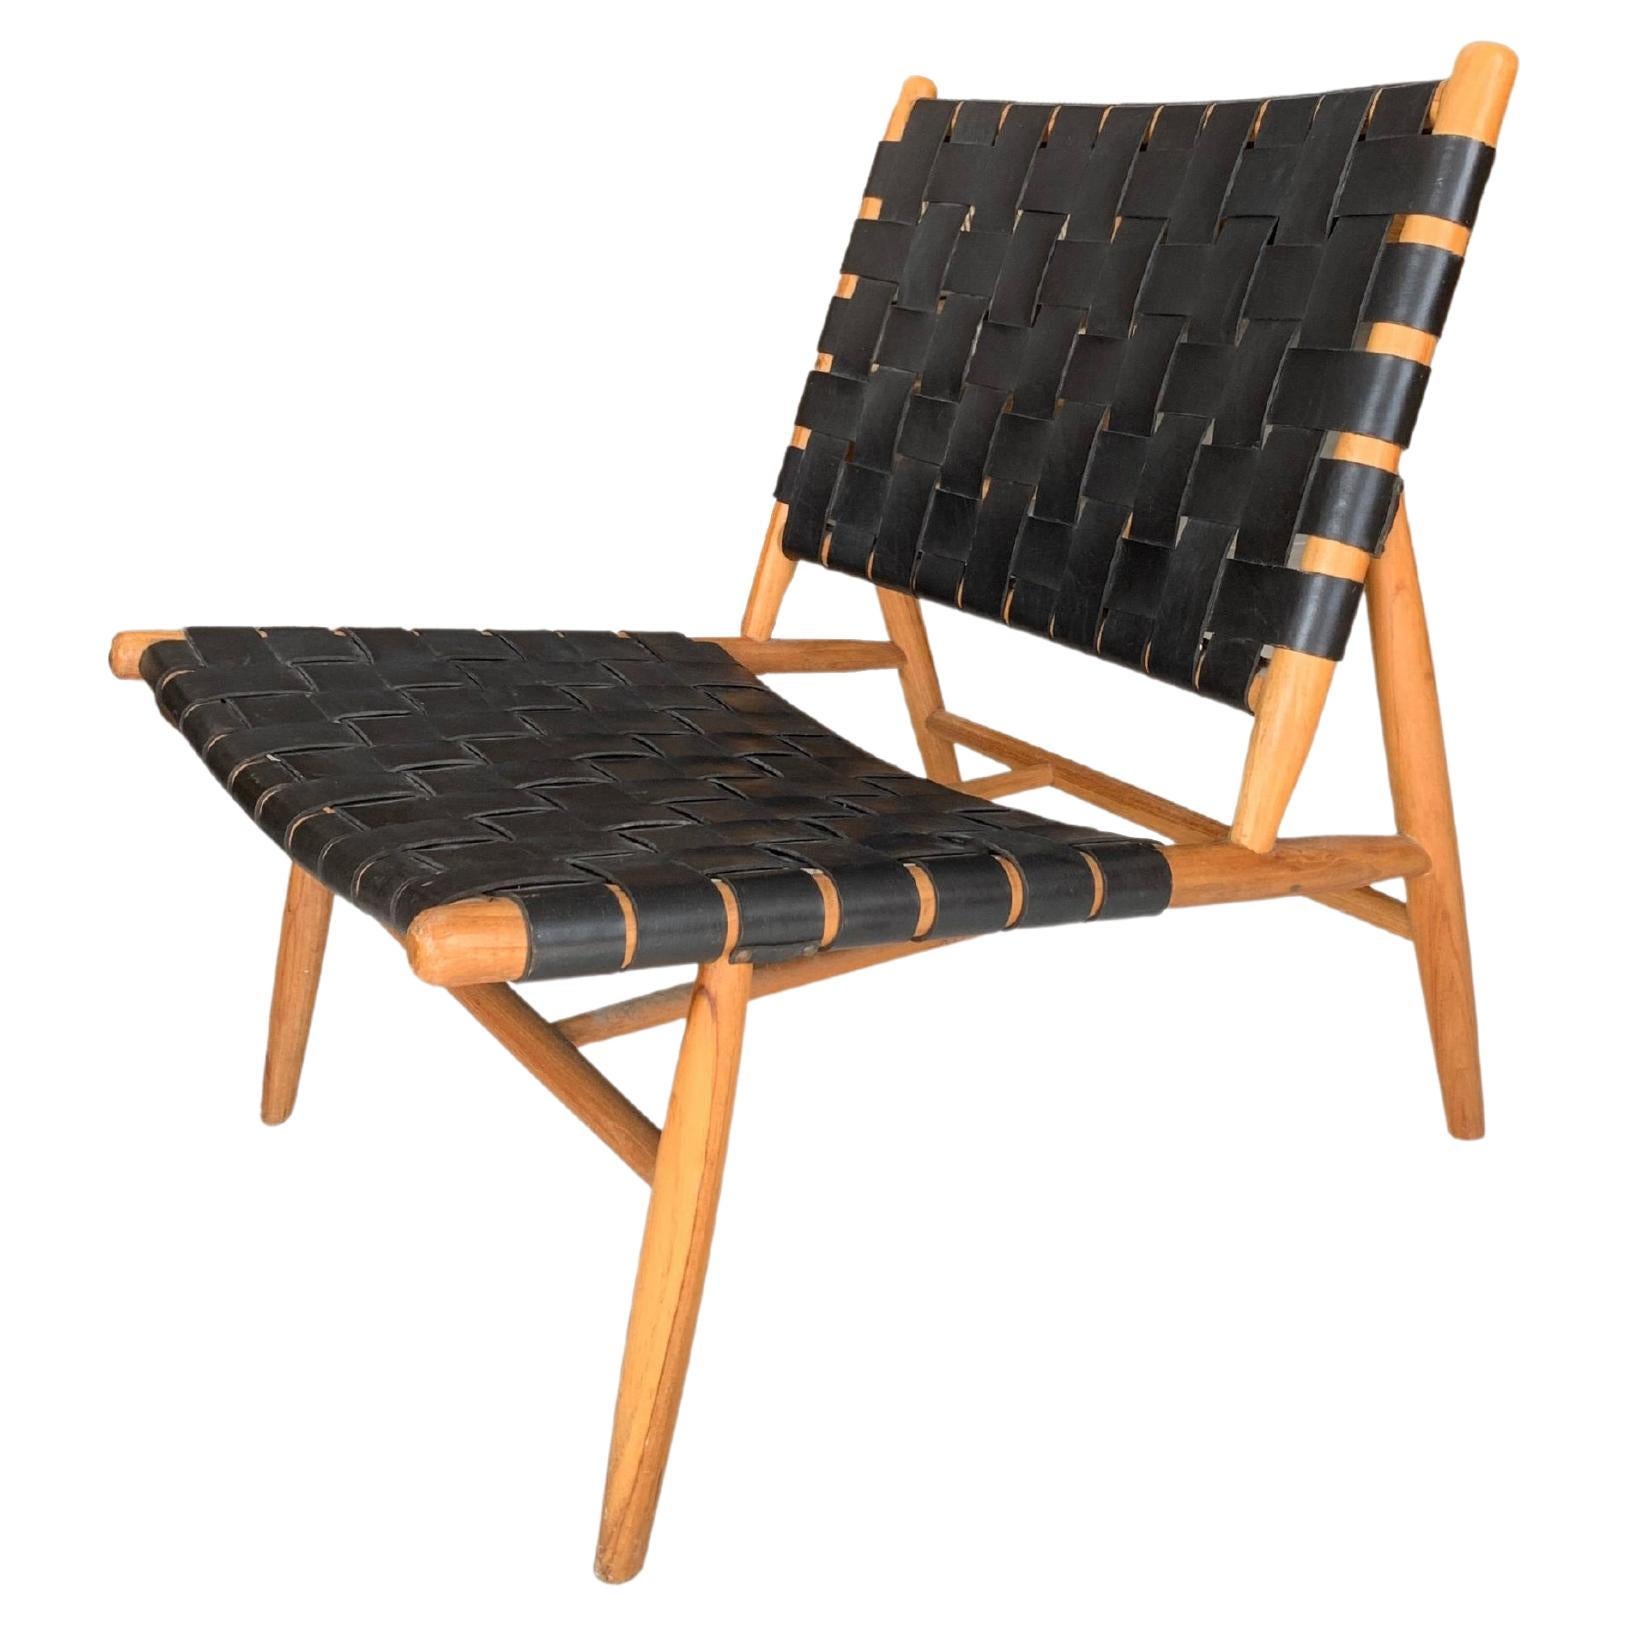 Teak Wood Framed Lounge Chair, with Black Woven Leather Seat 